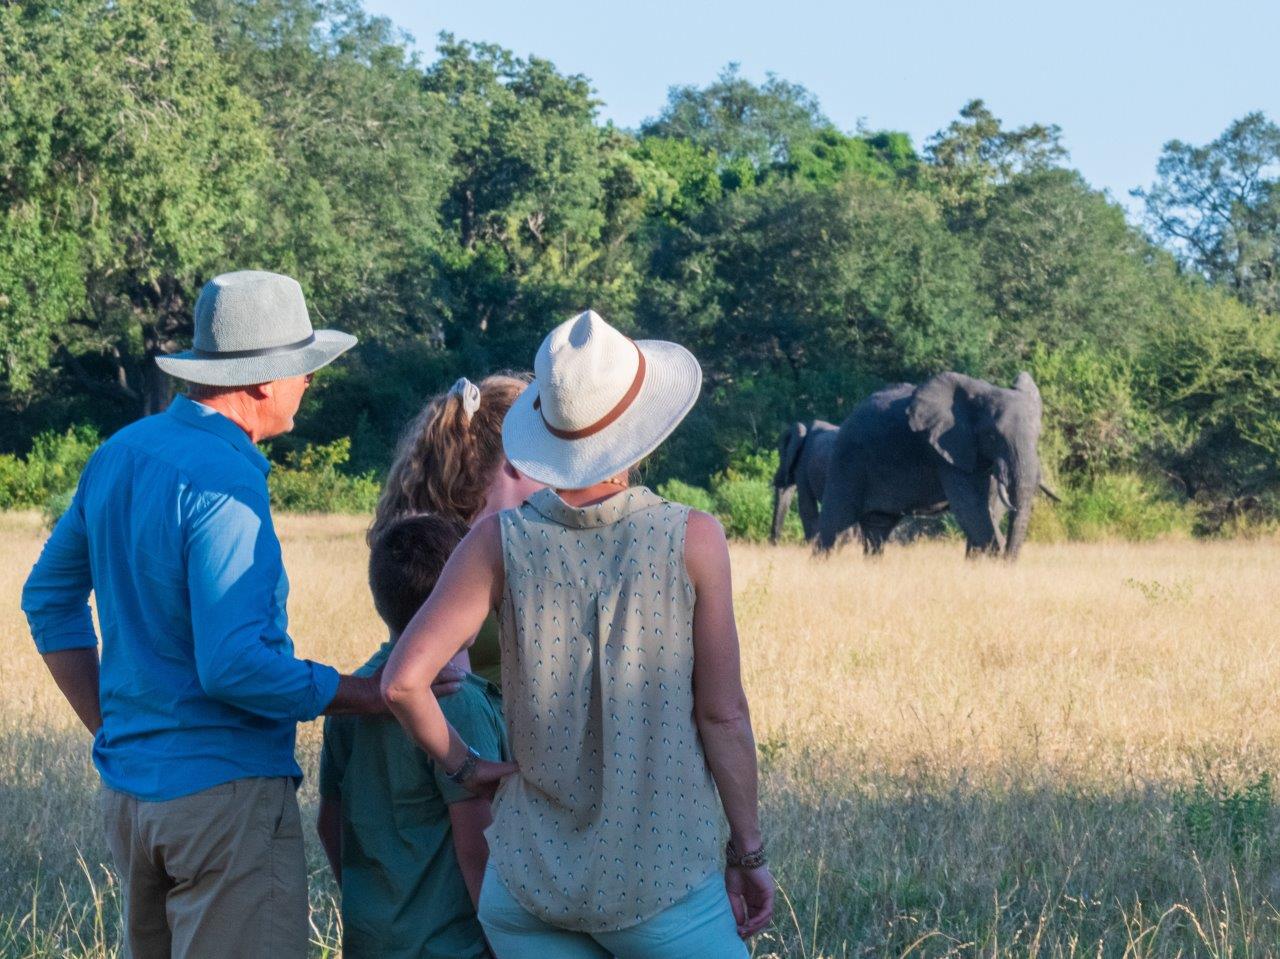 family of four watching an elephant in the distance in a field of dry grass in front of the treeline